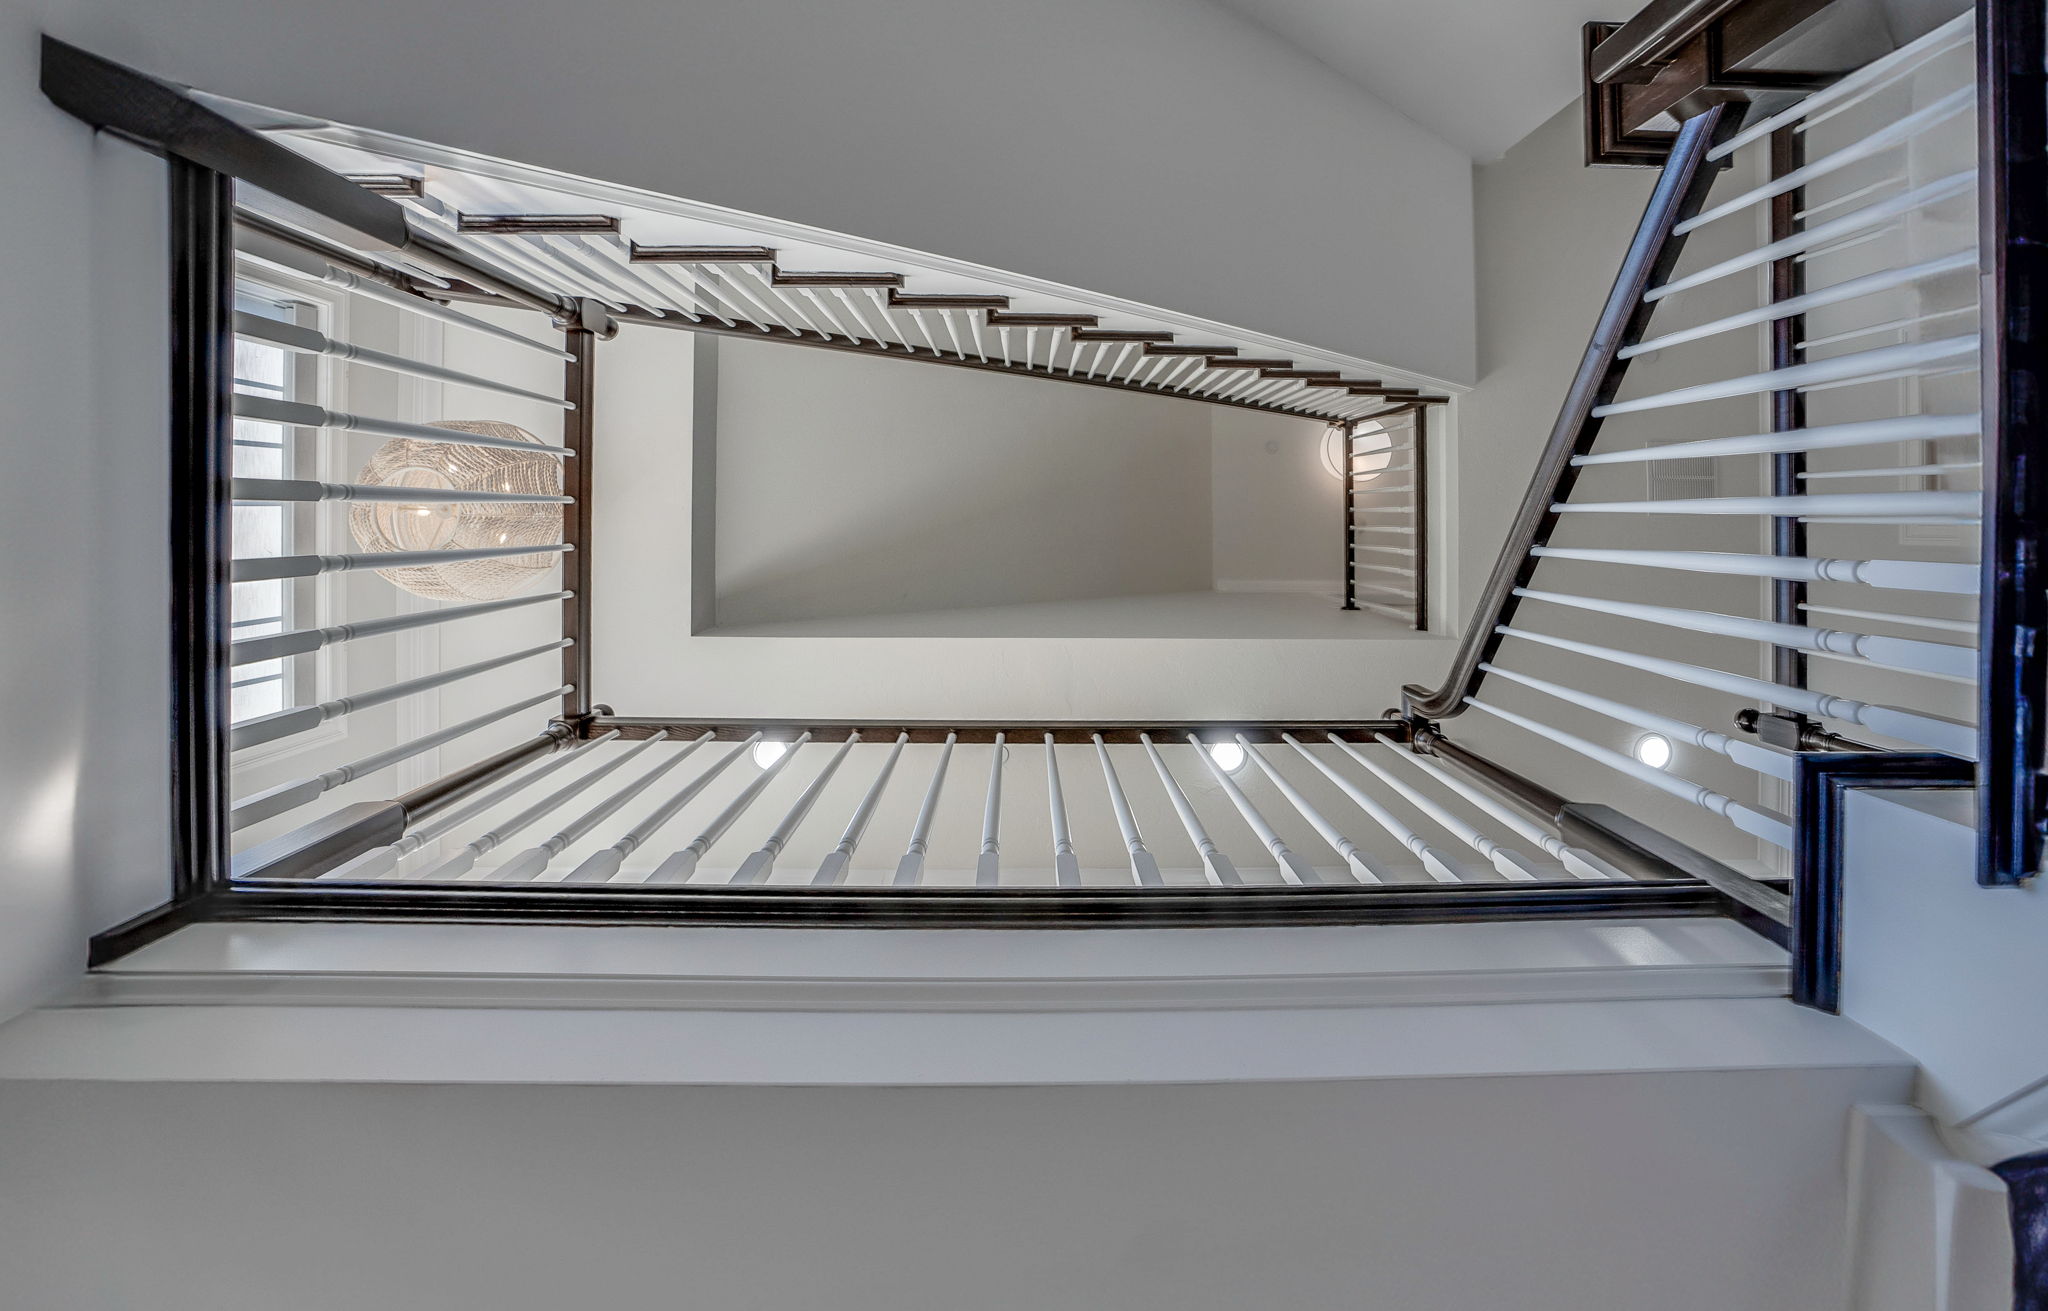 Grand Three-story staircase professionally refinished and stained including handrail, newels, and balusters